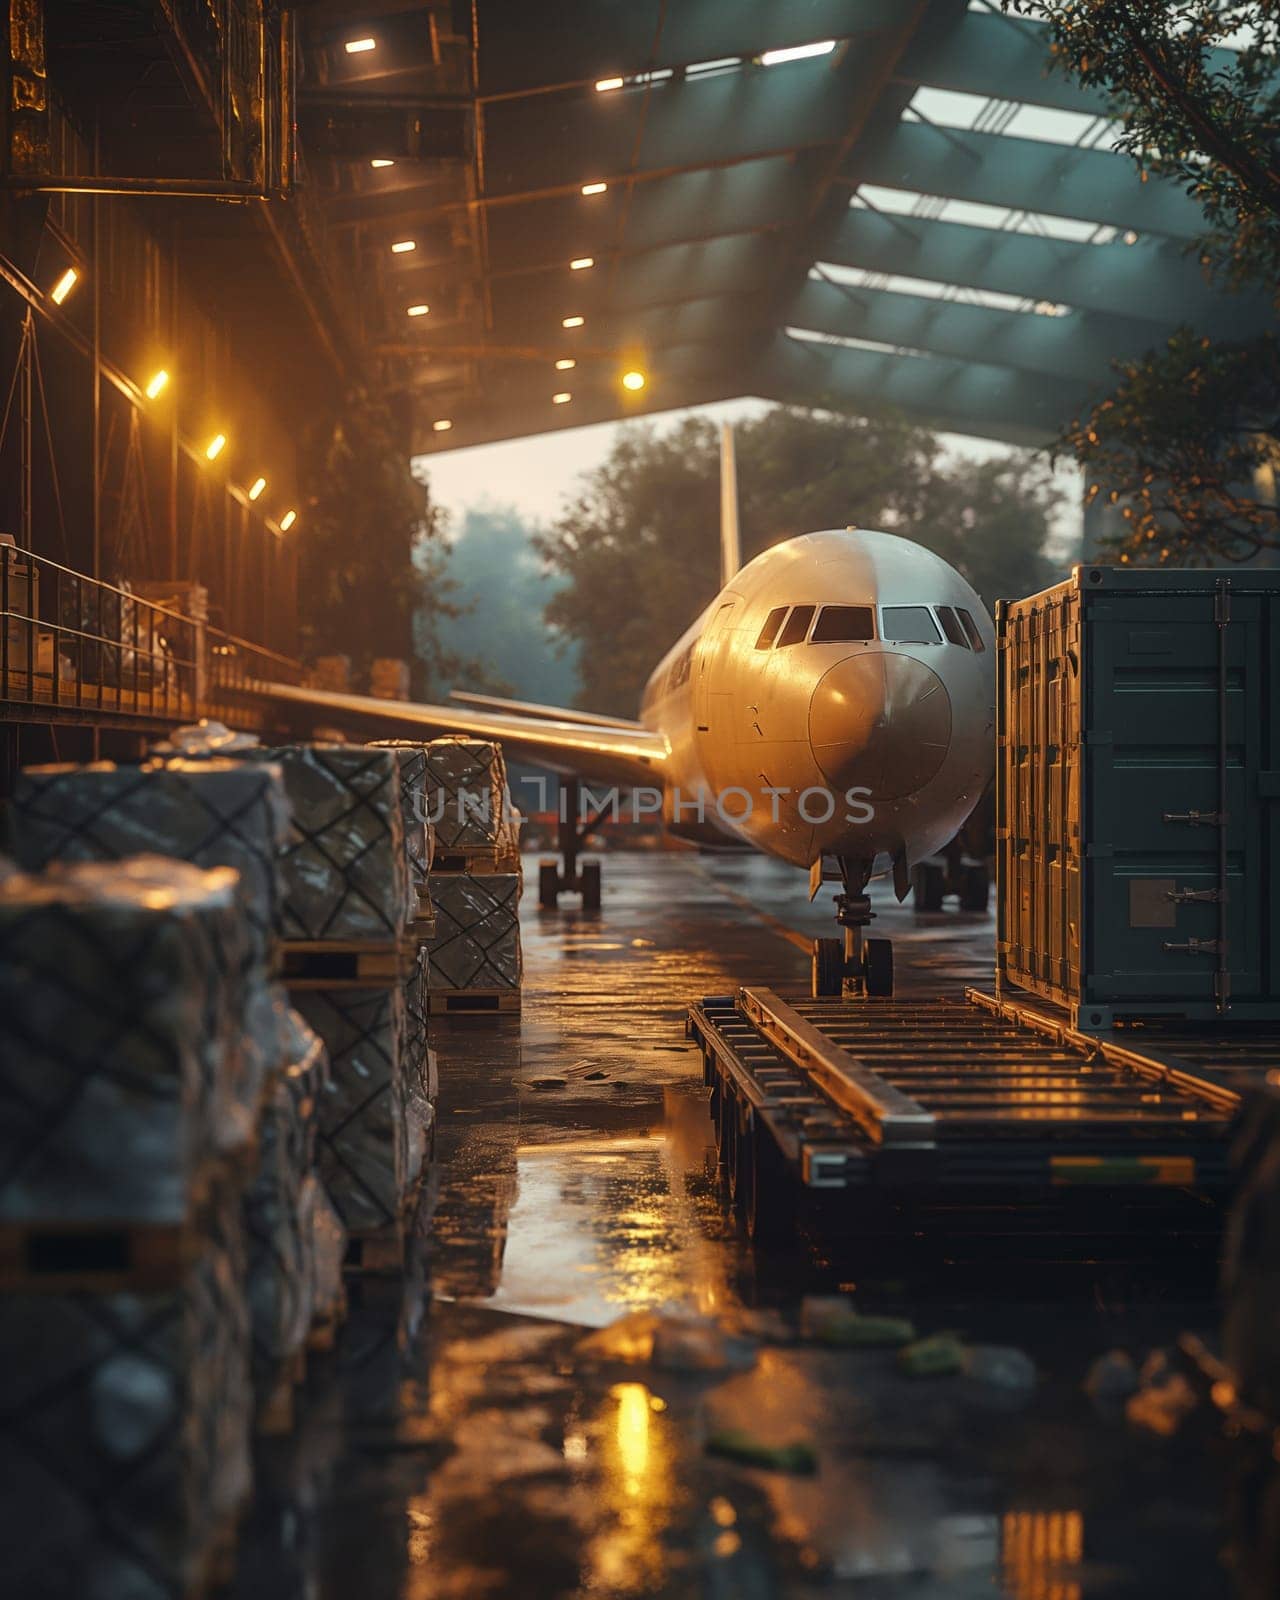 Loading cargo onto an airplane. by Fischeron